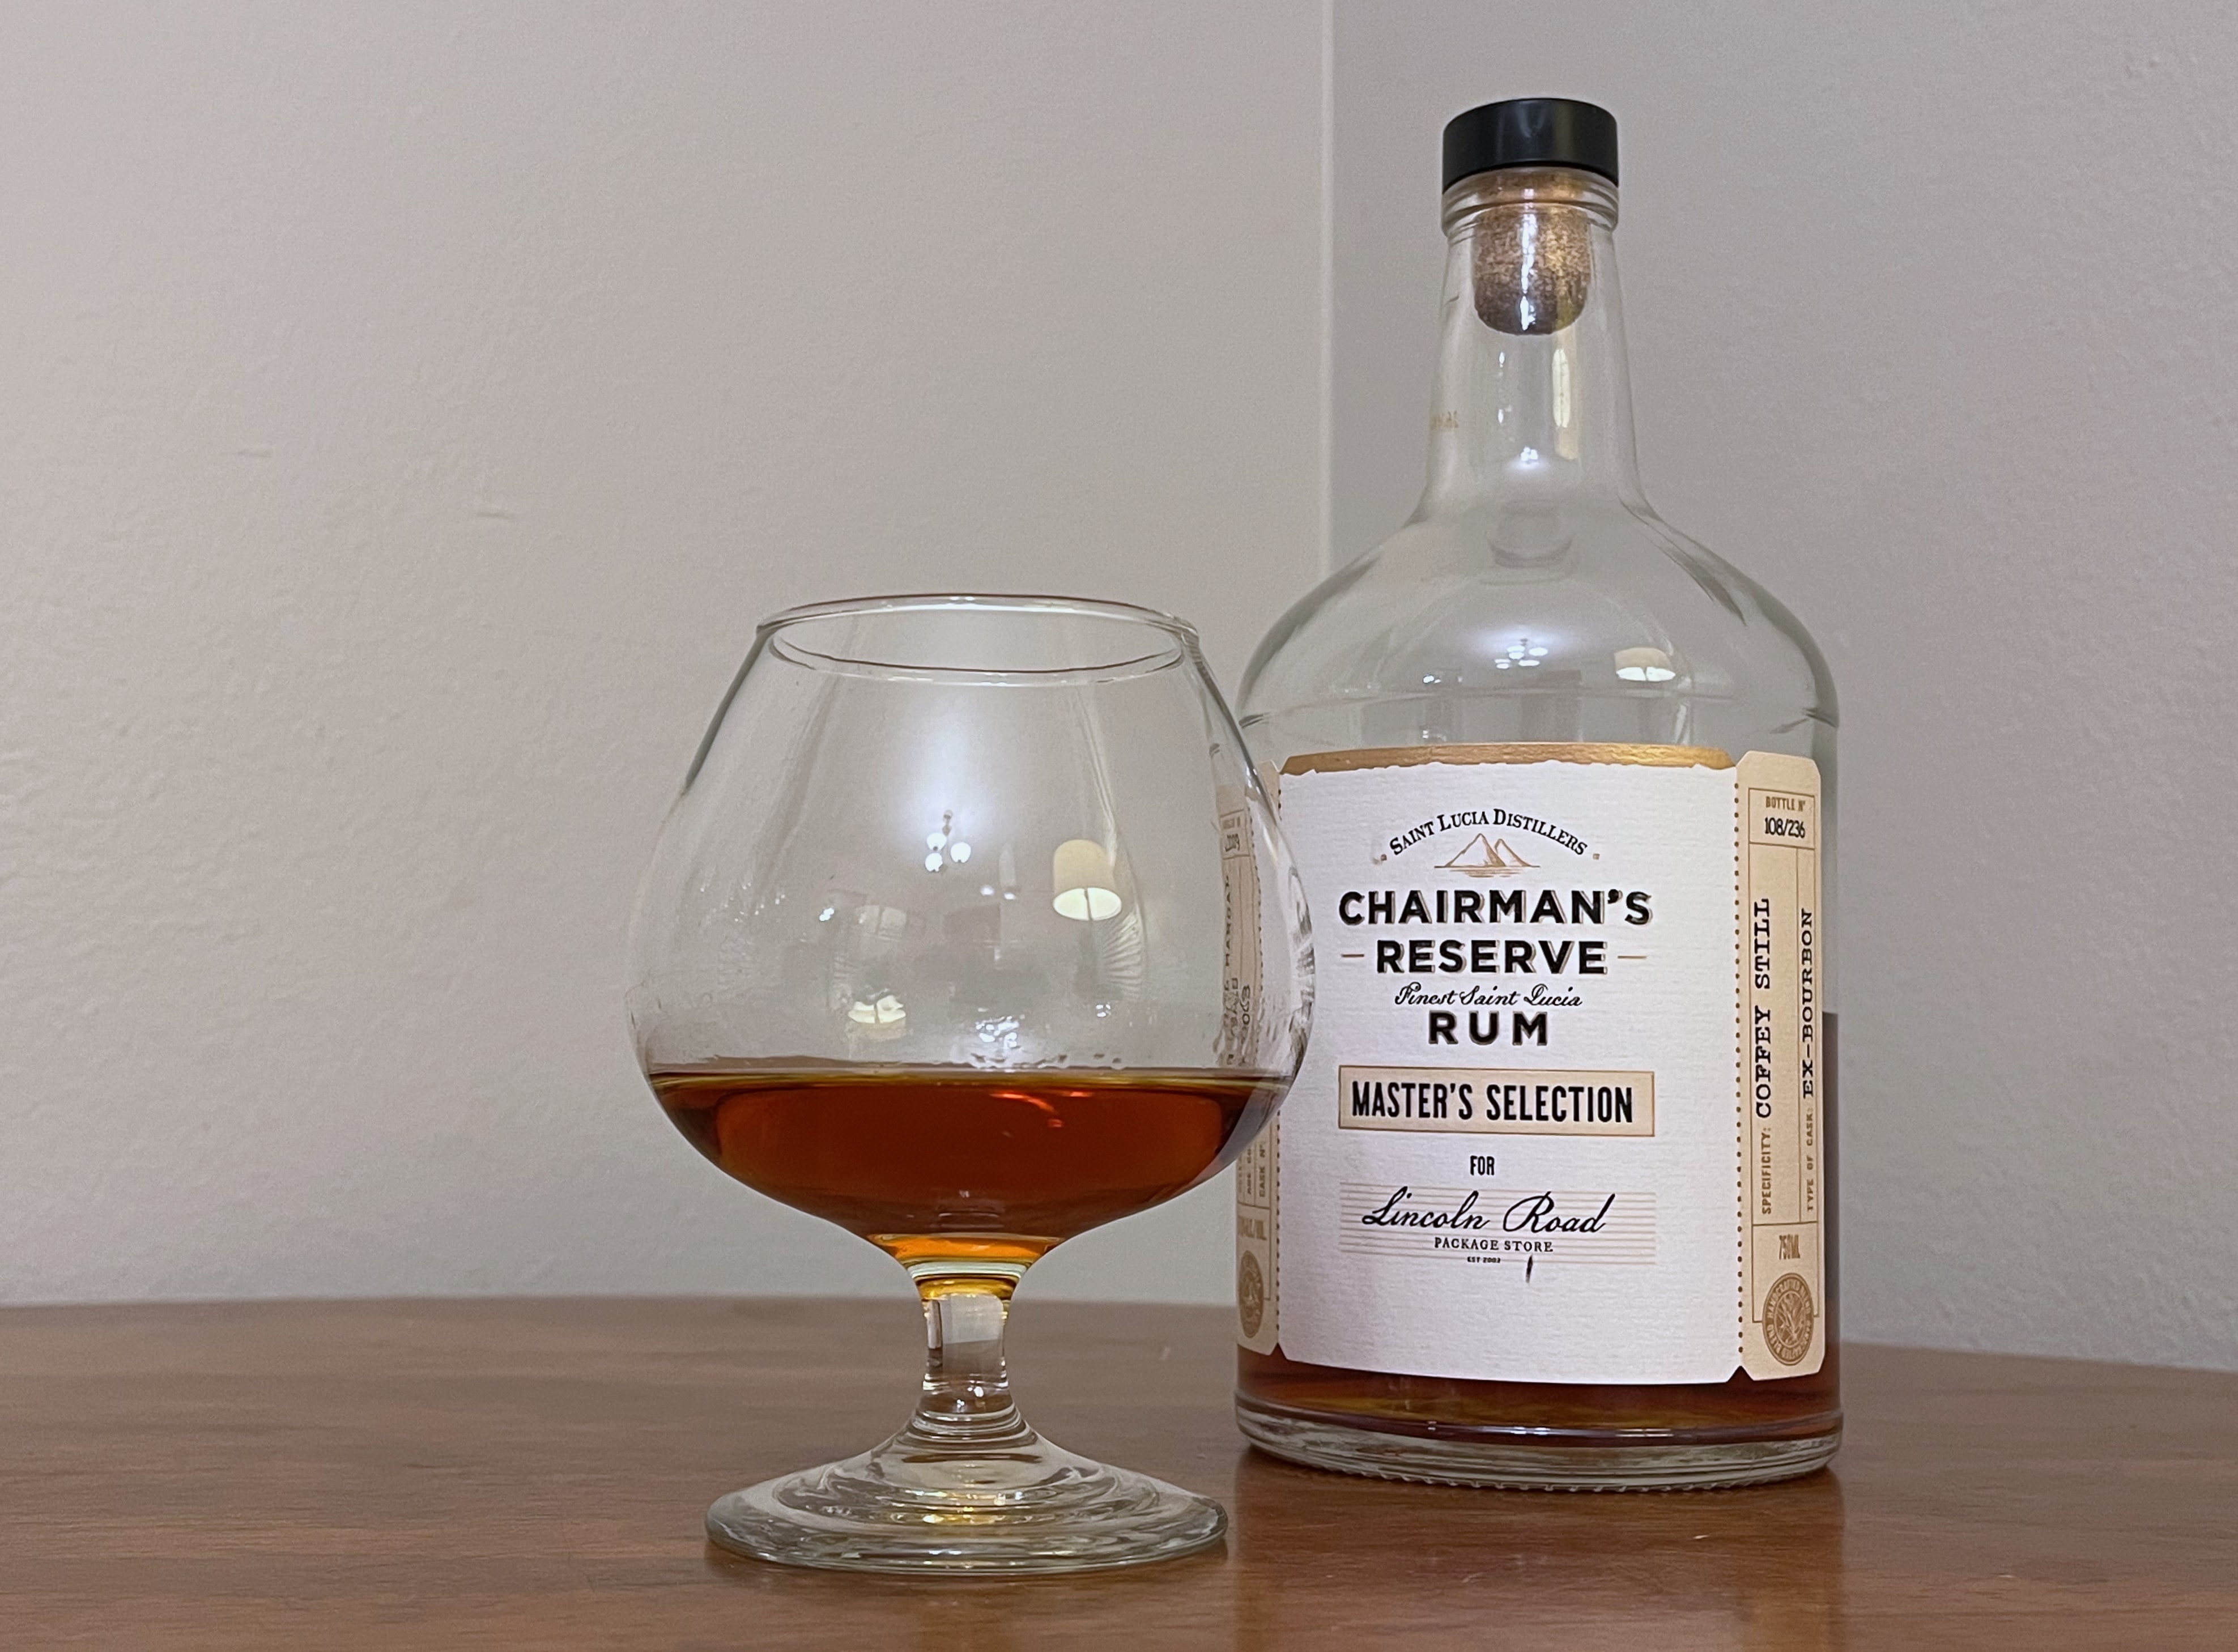 Review #102: Isautier 16 year Traditional Rum - Memphis Rum Club